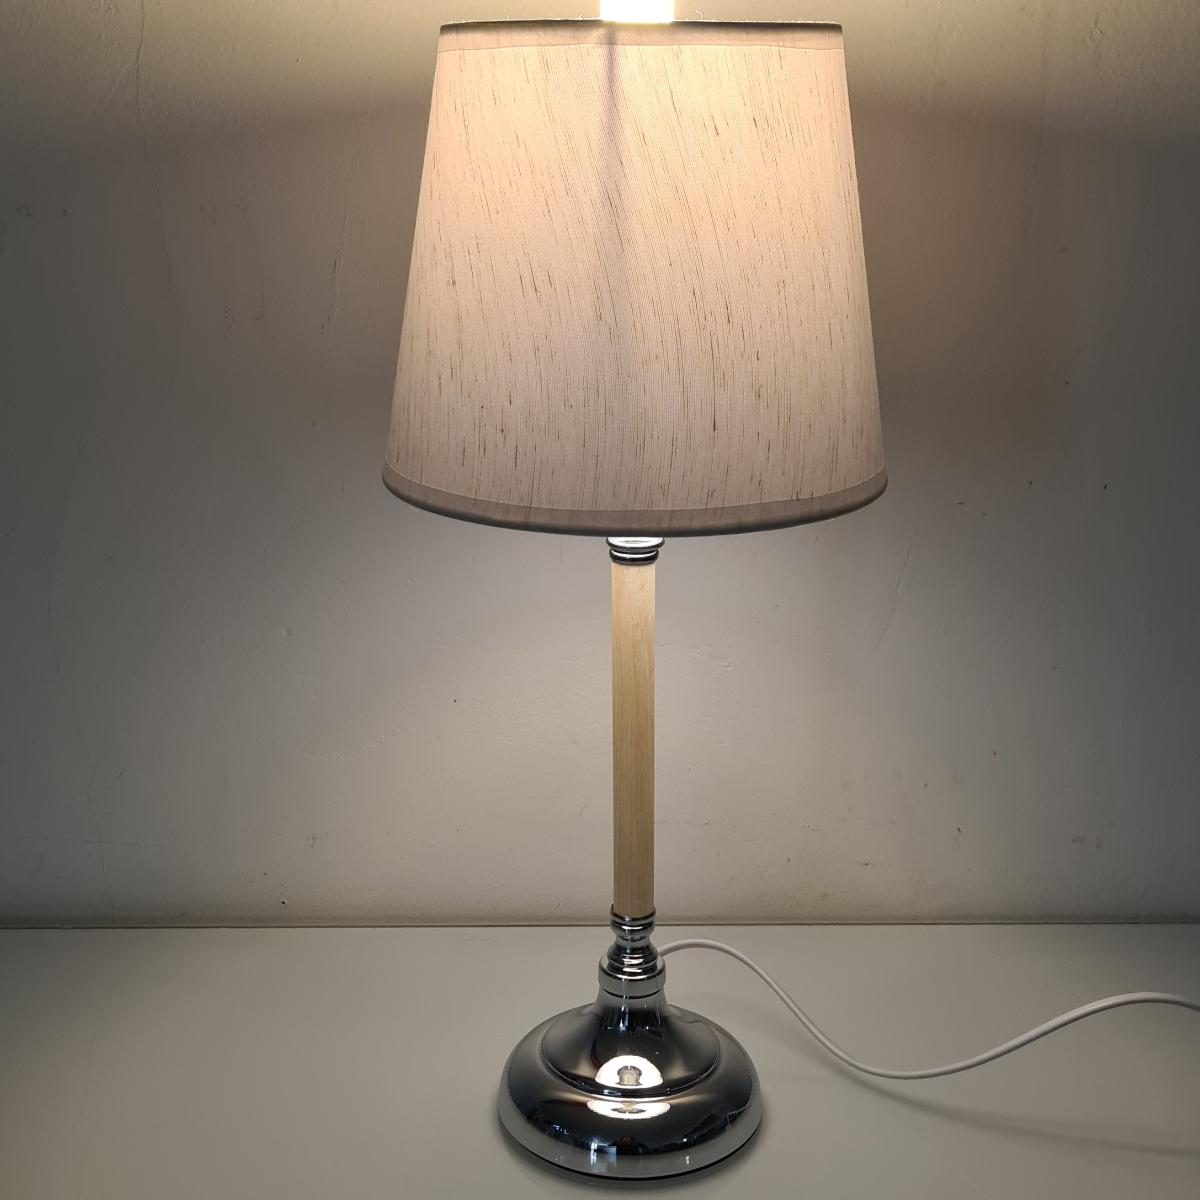 Ethan table lamp silver and beige